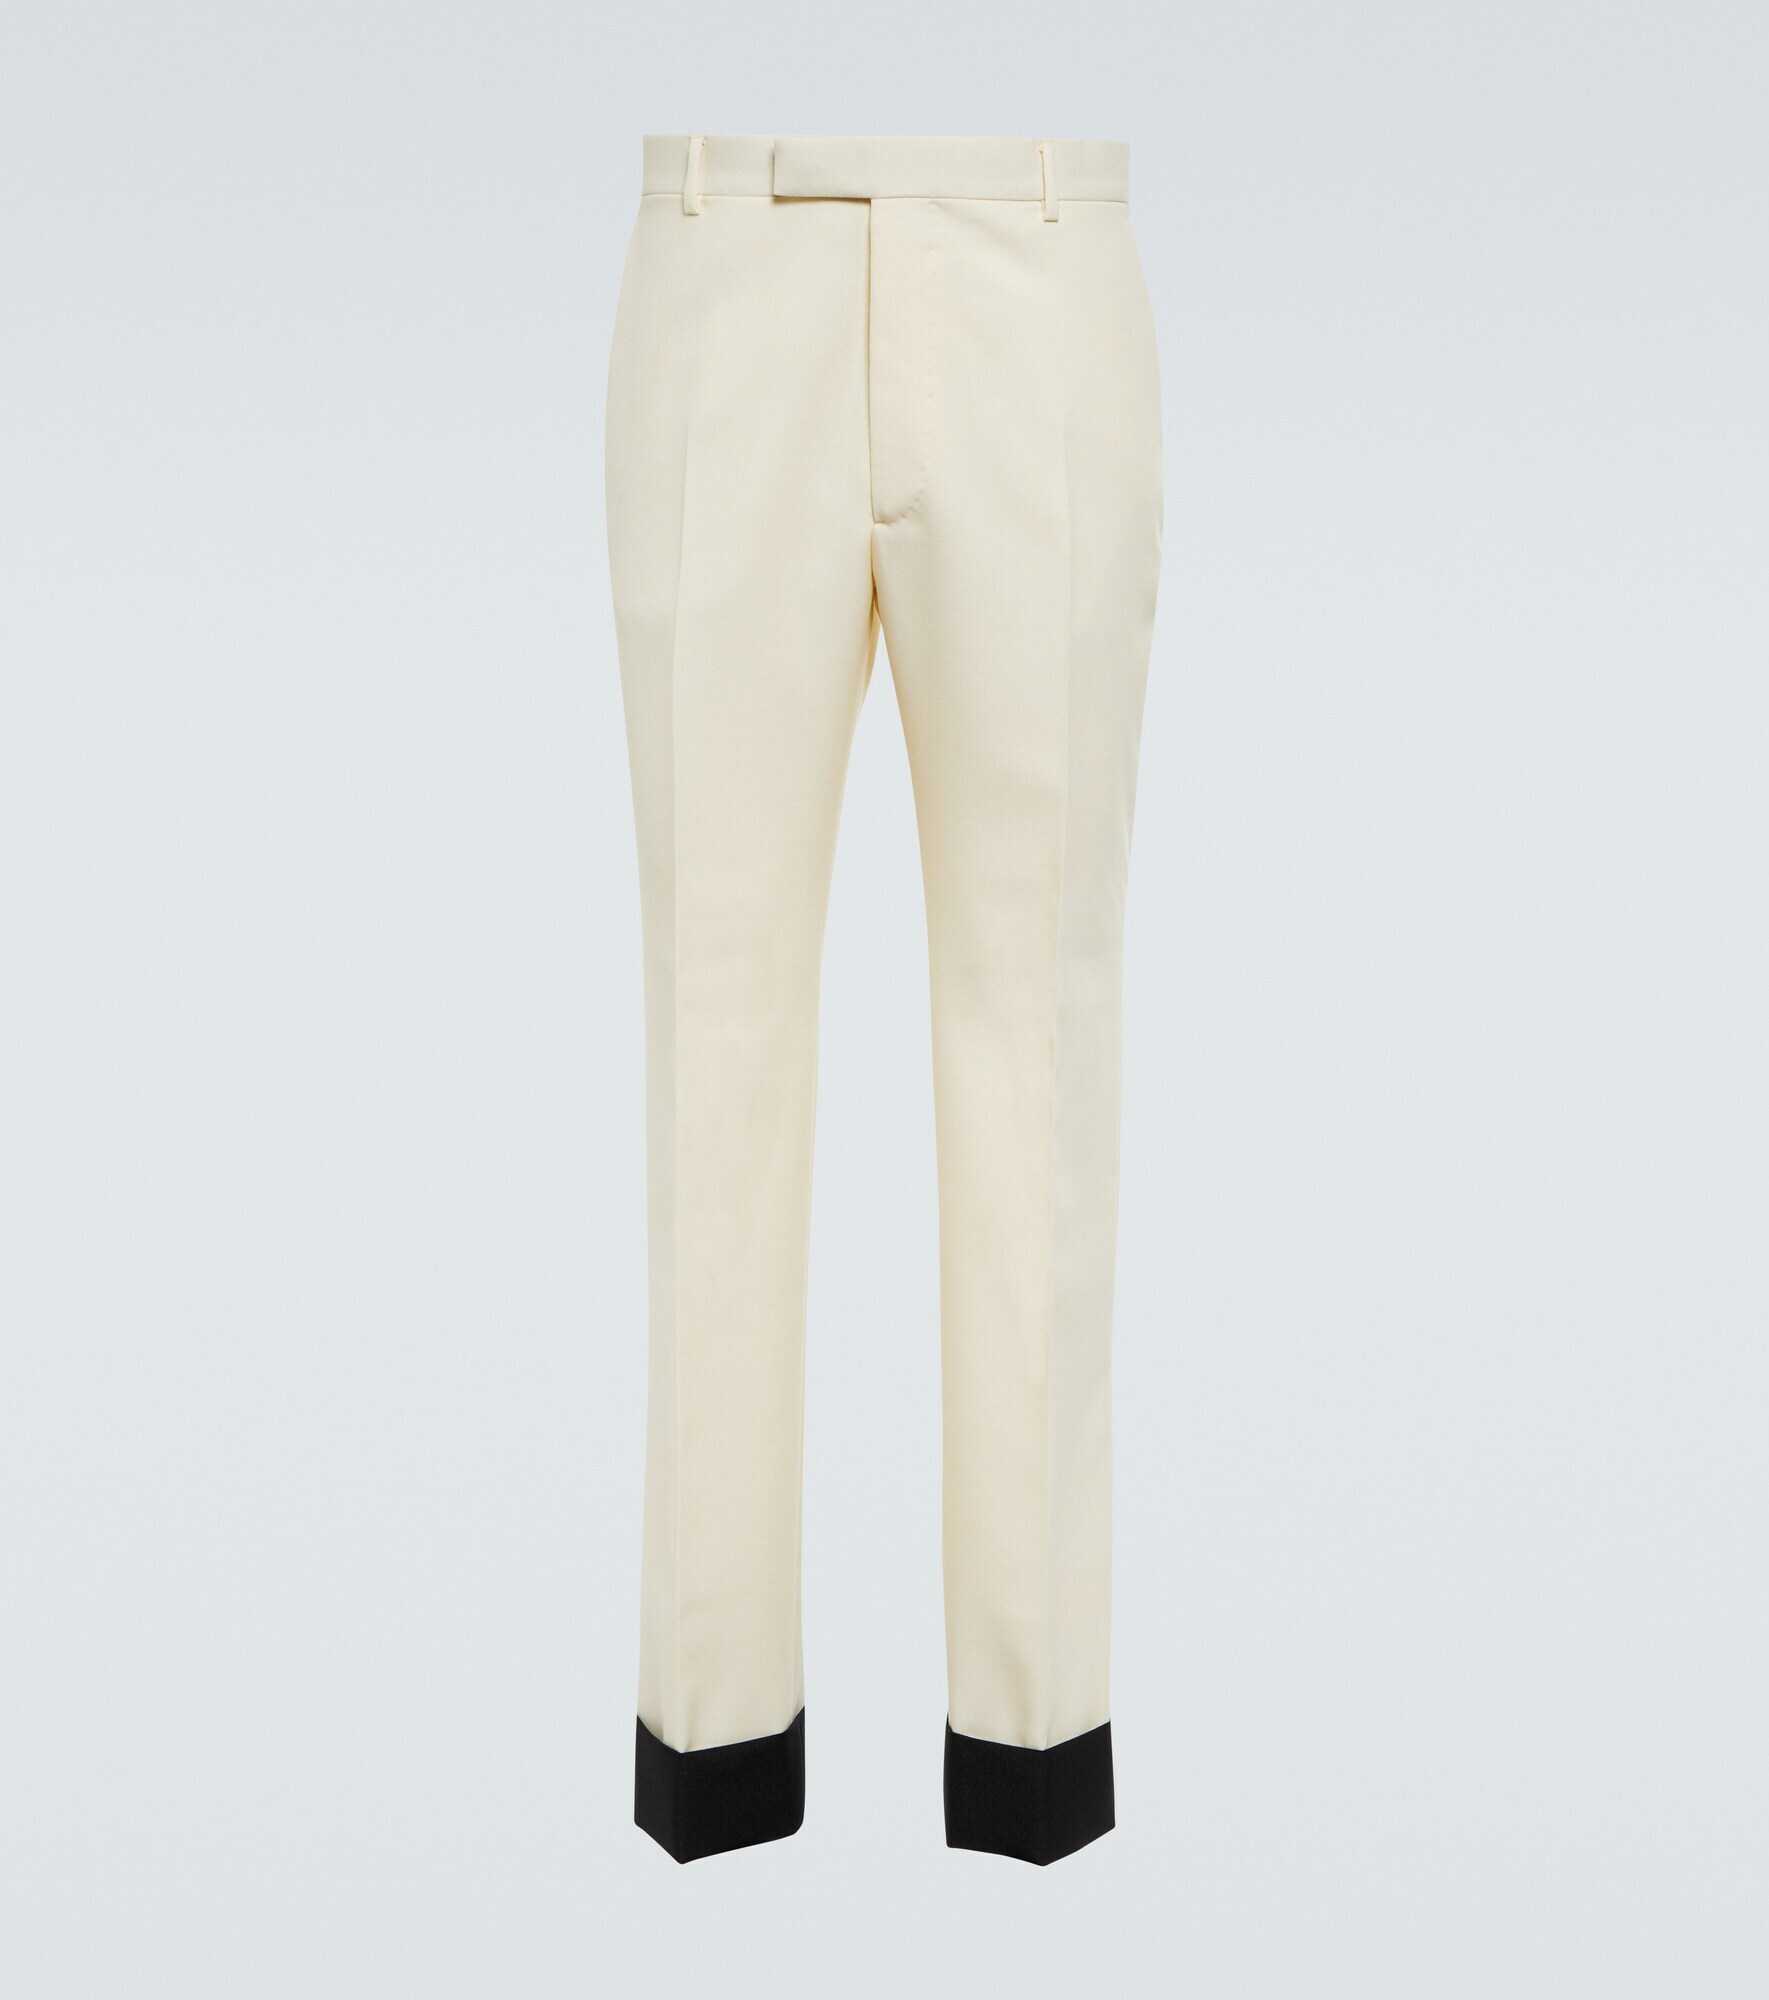 Gucci - Straight wool and mohair suit pants Gucci